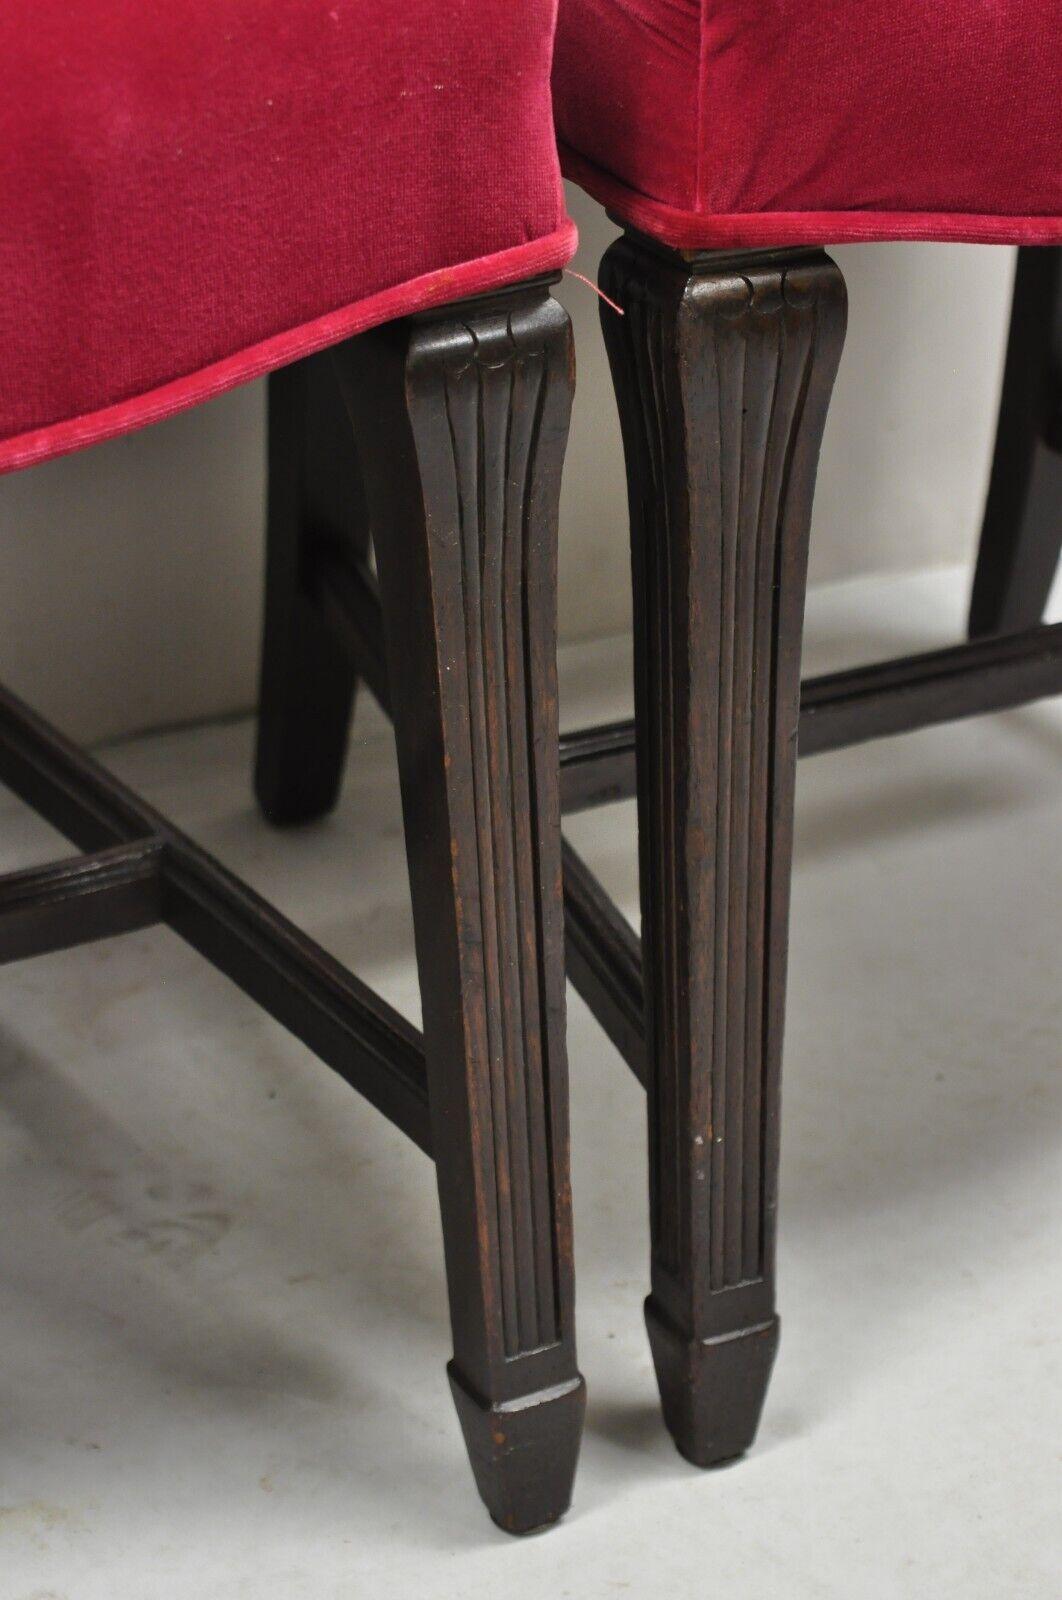 Antique Edwardian Floral Carved Mahogany Red Mohair Dining Chairs - Set of 4 For Sale 4